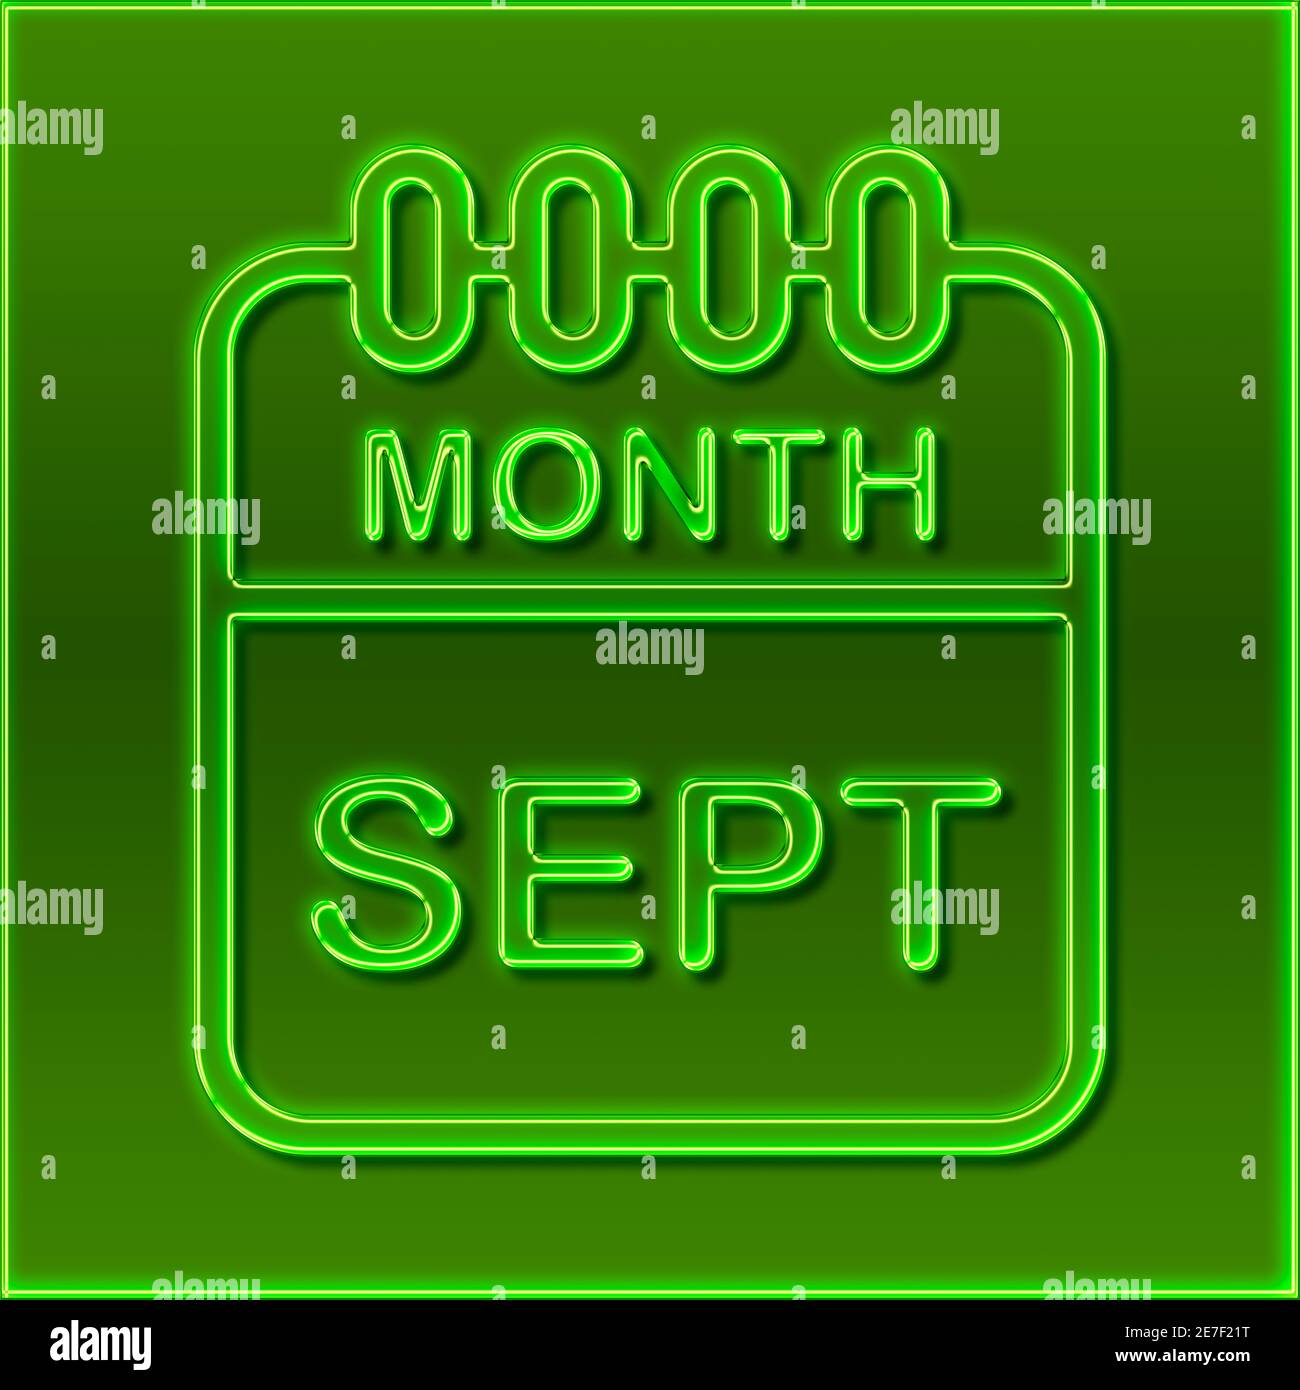 A calendar in the design of a green neon sign shows the Month September Stock Photo